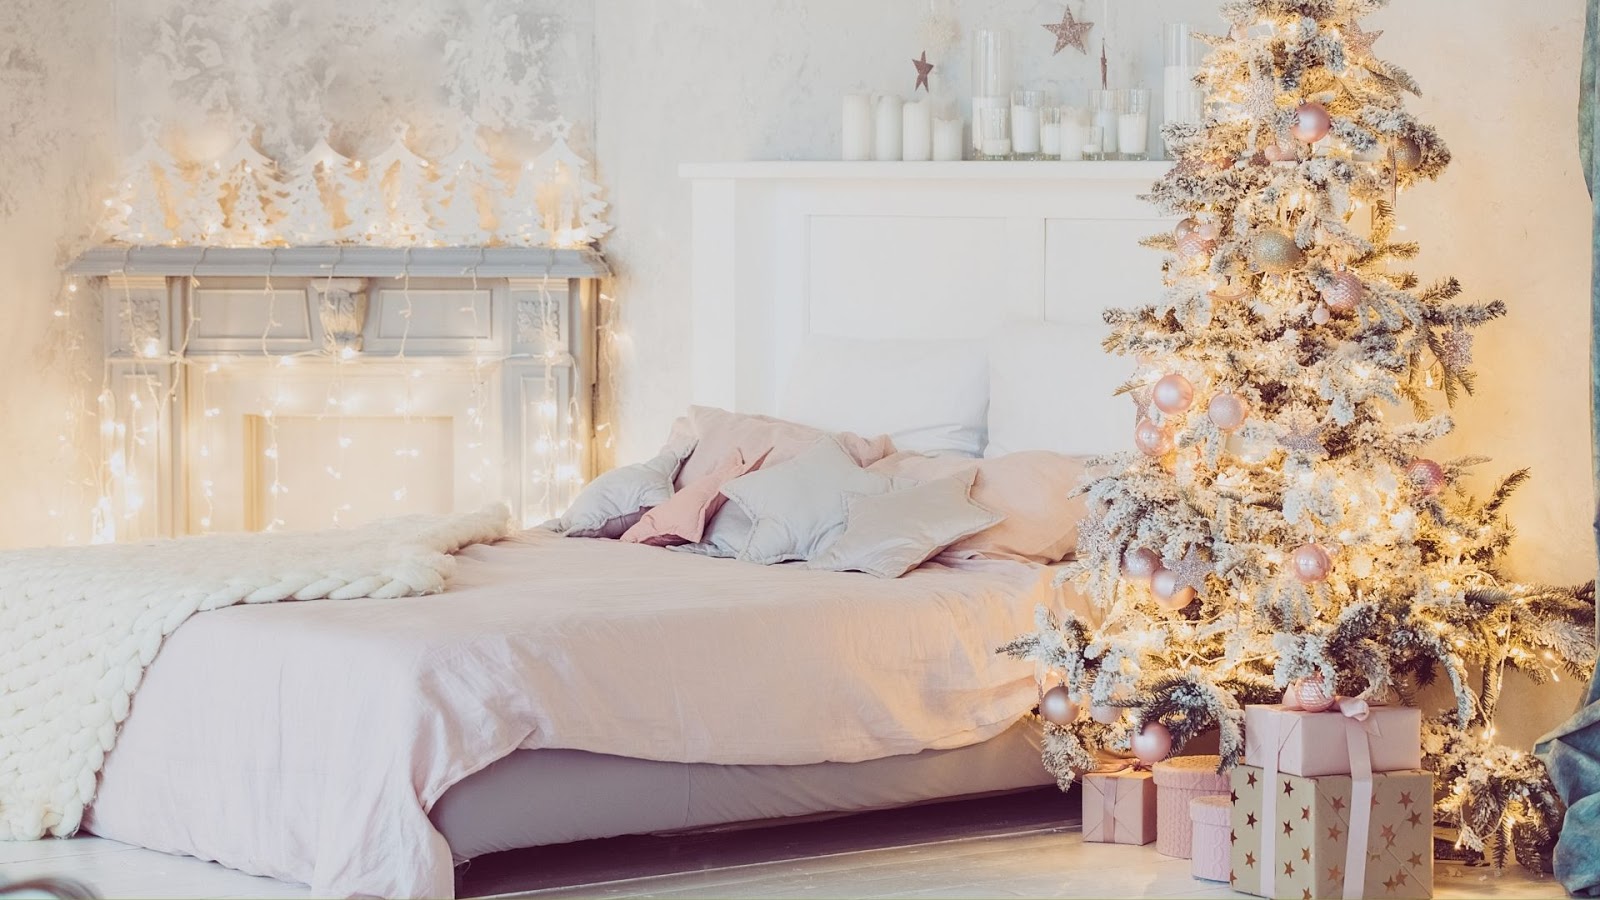 5 Tips to Bring the Festive Season Into Your Home - Luxe Home Interiors